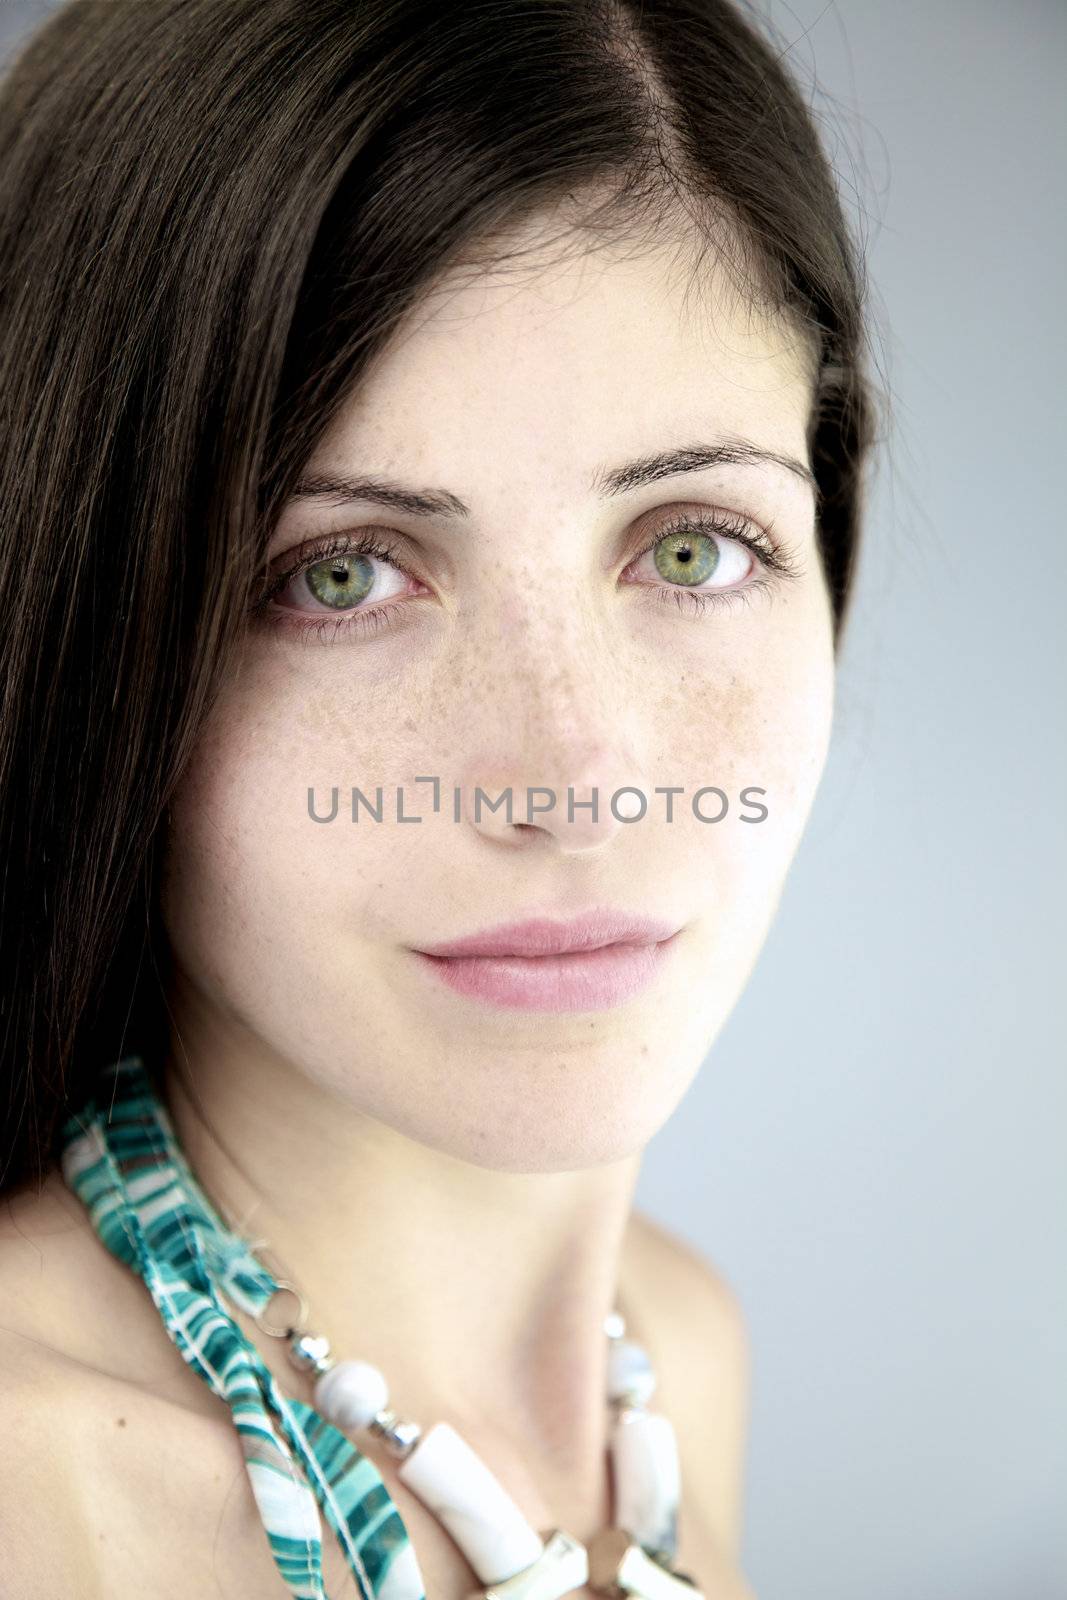 Sexy female model closeup posing serious with beautiful green eyes and freckles